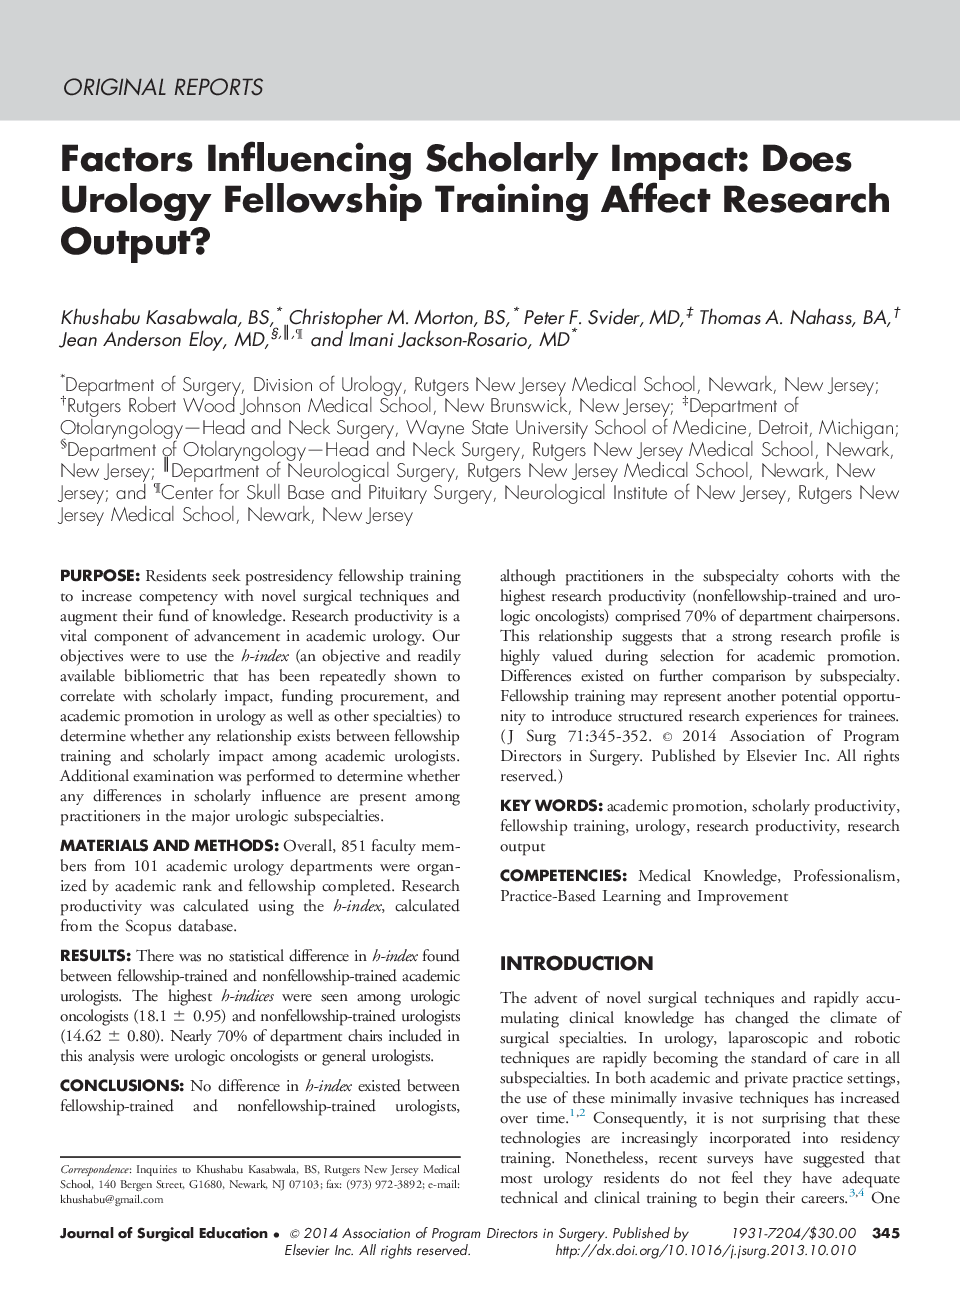 Factors Influencing Scholarly Impact: Does Urology Fellowship Training Affect Research Output?